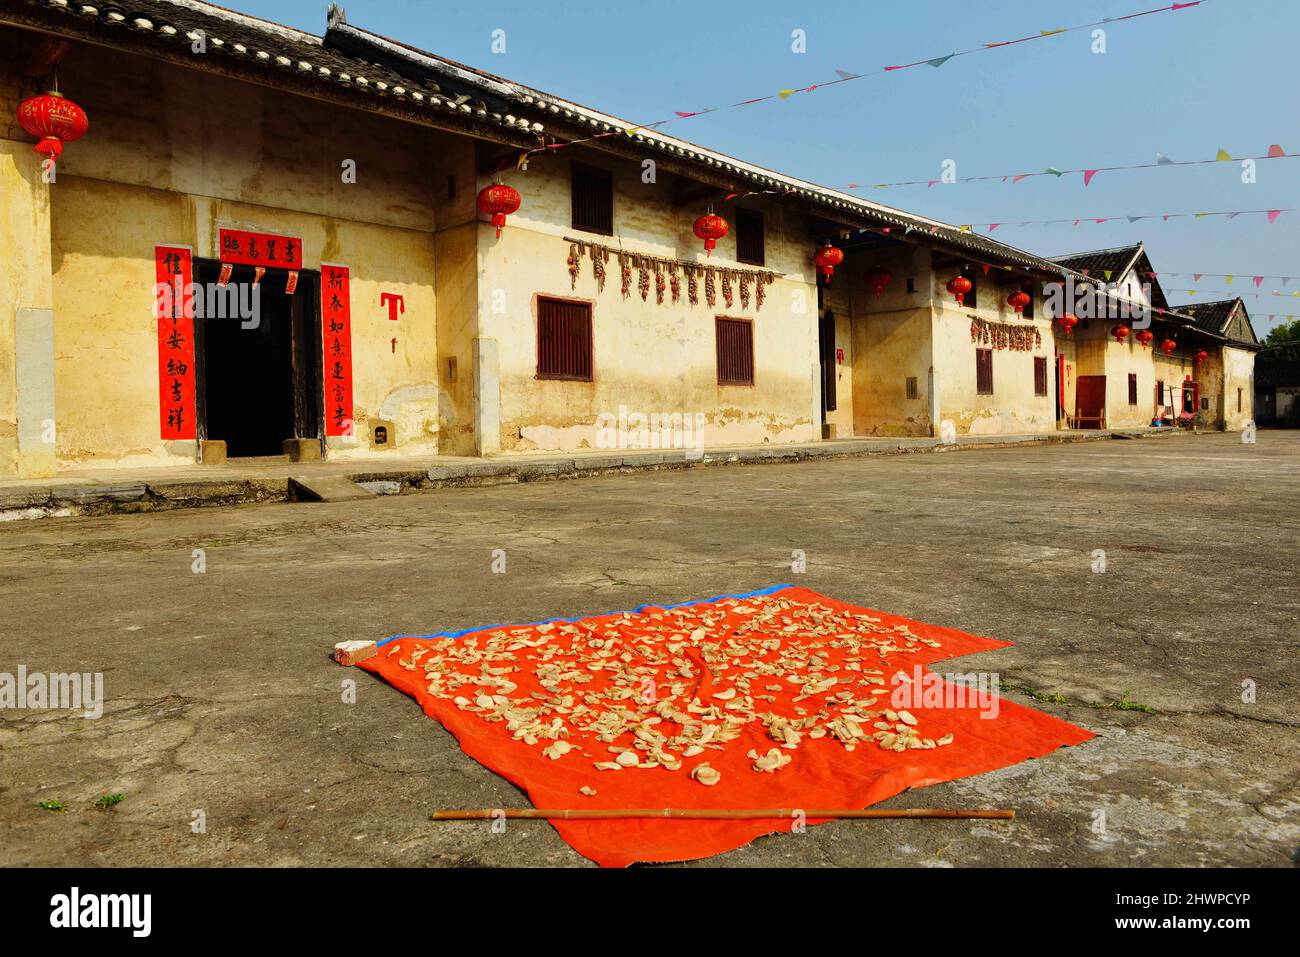 Hezhou, Hezhou, China. 7th Mar, 2022. A Hakka Round House in Rinchong Village, Liantang Town, Babu District, Hezhou City, Guangxi Province, taken on March 5.Jiang's ancestral house, located in Rinchong Village, Liantang Town, Babu District, Hezhou City, Guangxi Province, was built in the Qing Dynasty and has a history of more than 200 years. It is a typical Hakka Round House in East Guizhou. The Round House covers an area of more than 30 acres. The building is a square symmetrical structure, surrounded by a 3-meter-high wall and separated from the outside world. The layout of the buildings, Stock Photo